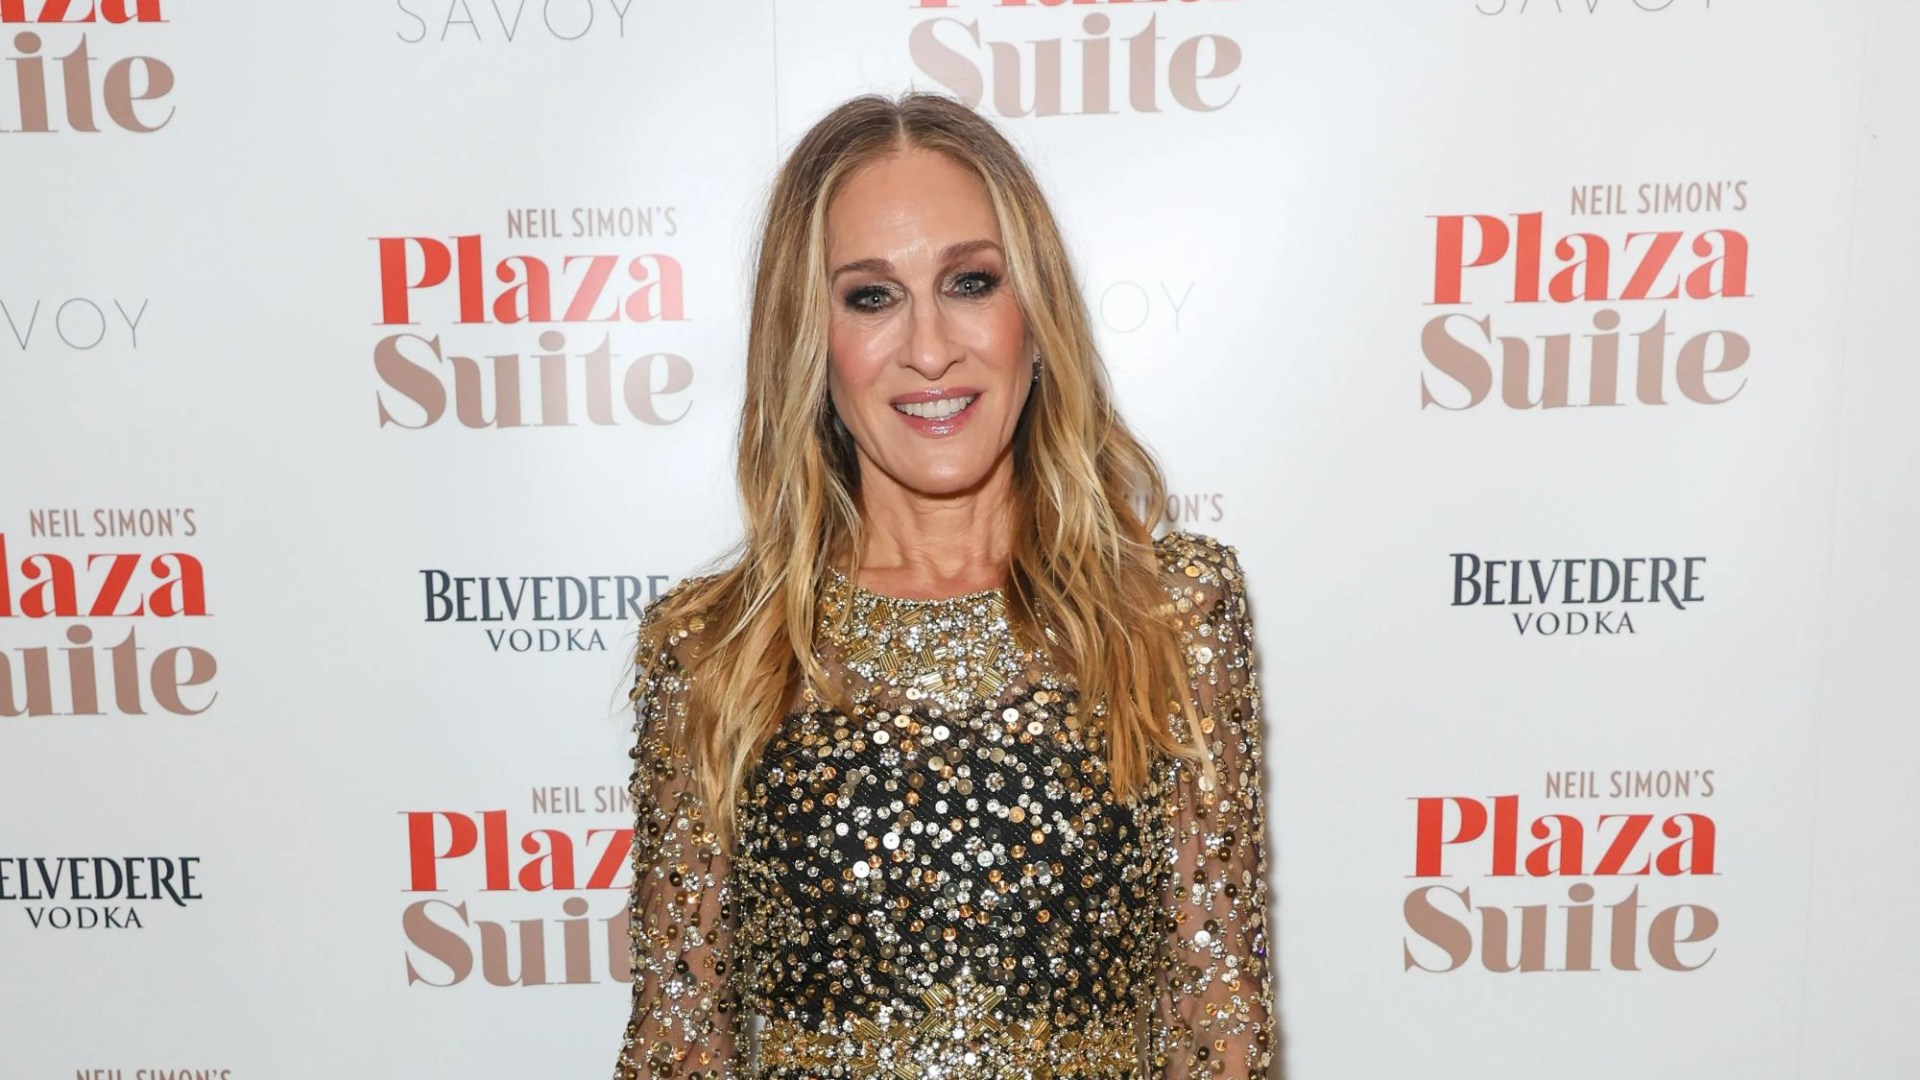 Sarah Jessica Parker Dazzles in Plaza Suite: Leaving Carrie Bradshaw Far Behind